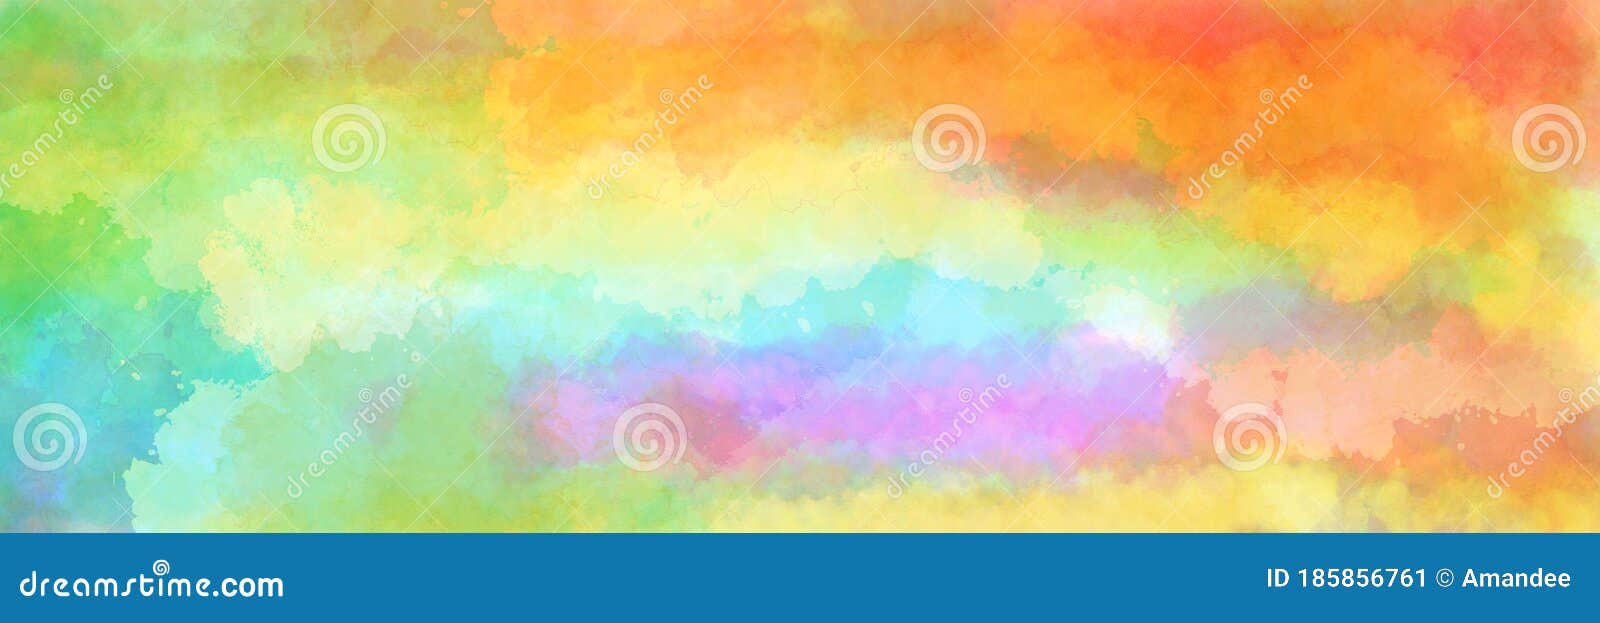 colorful watercolor background of abstract sunset sky with puffy clouds in bright rainbow colors